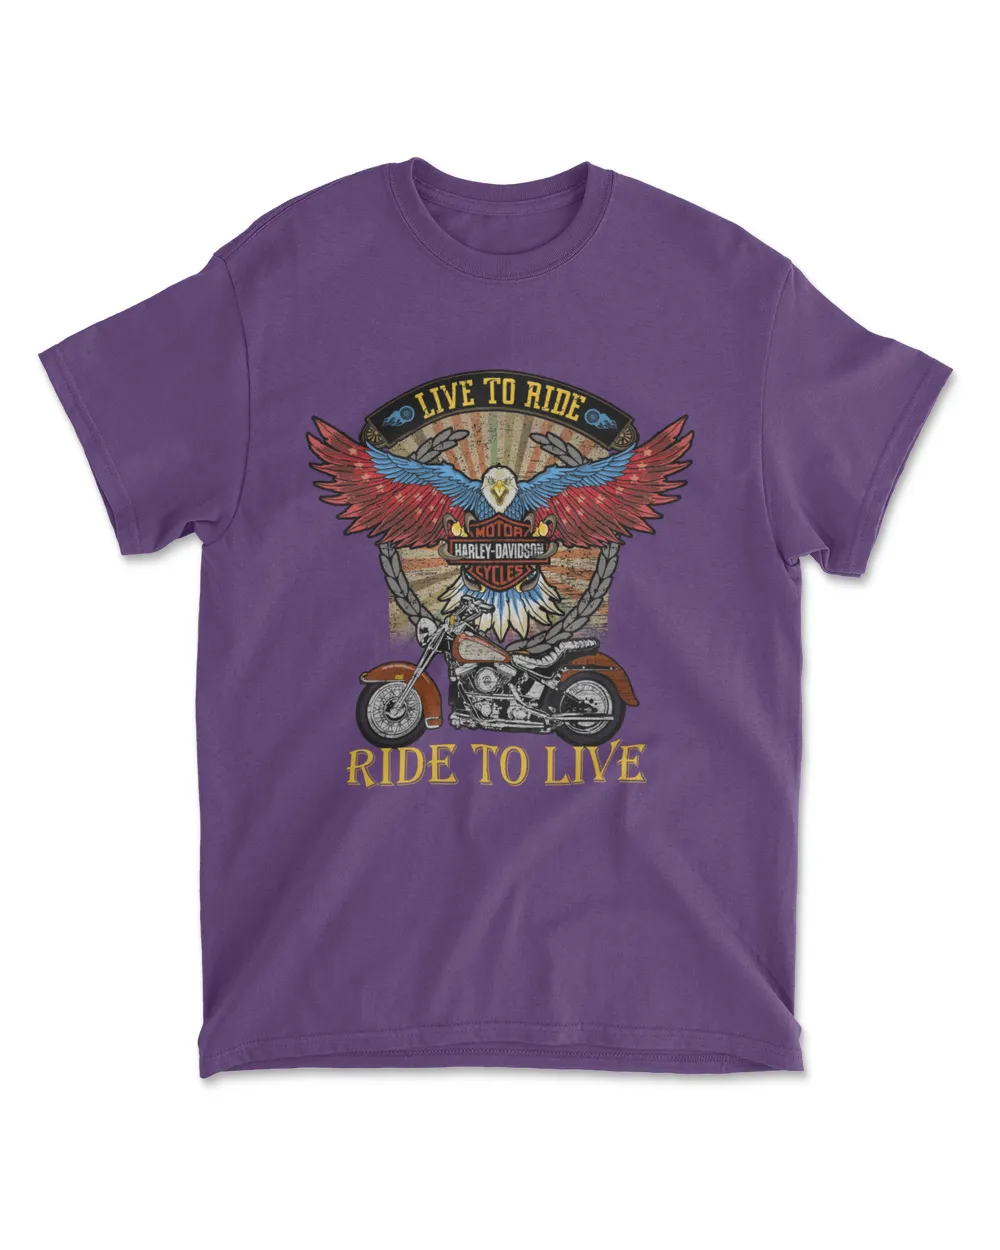 Live To Ride Ride To Live Harley Eagle Motorcycle Retro Vintage